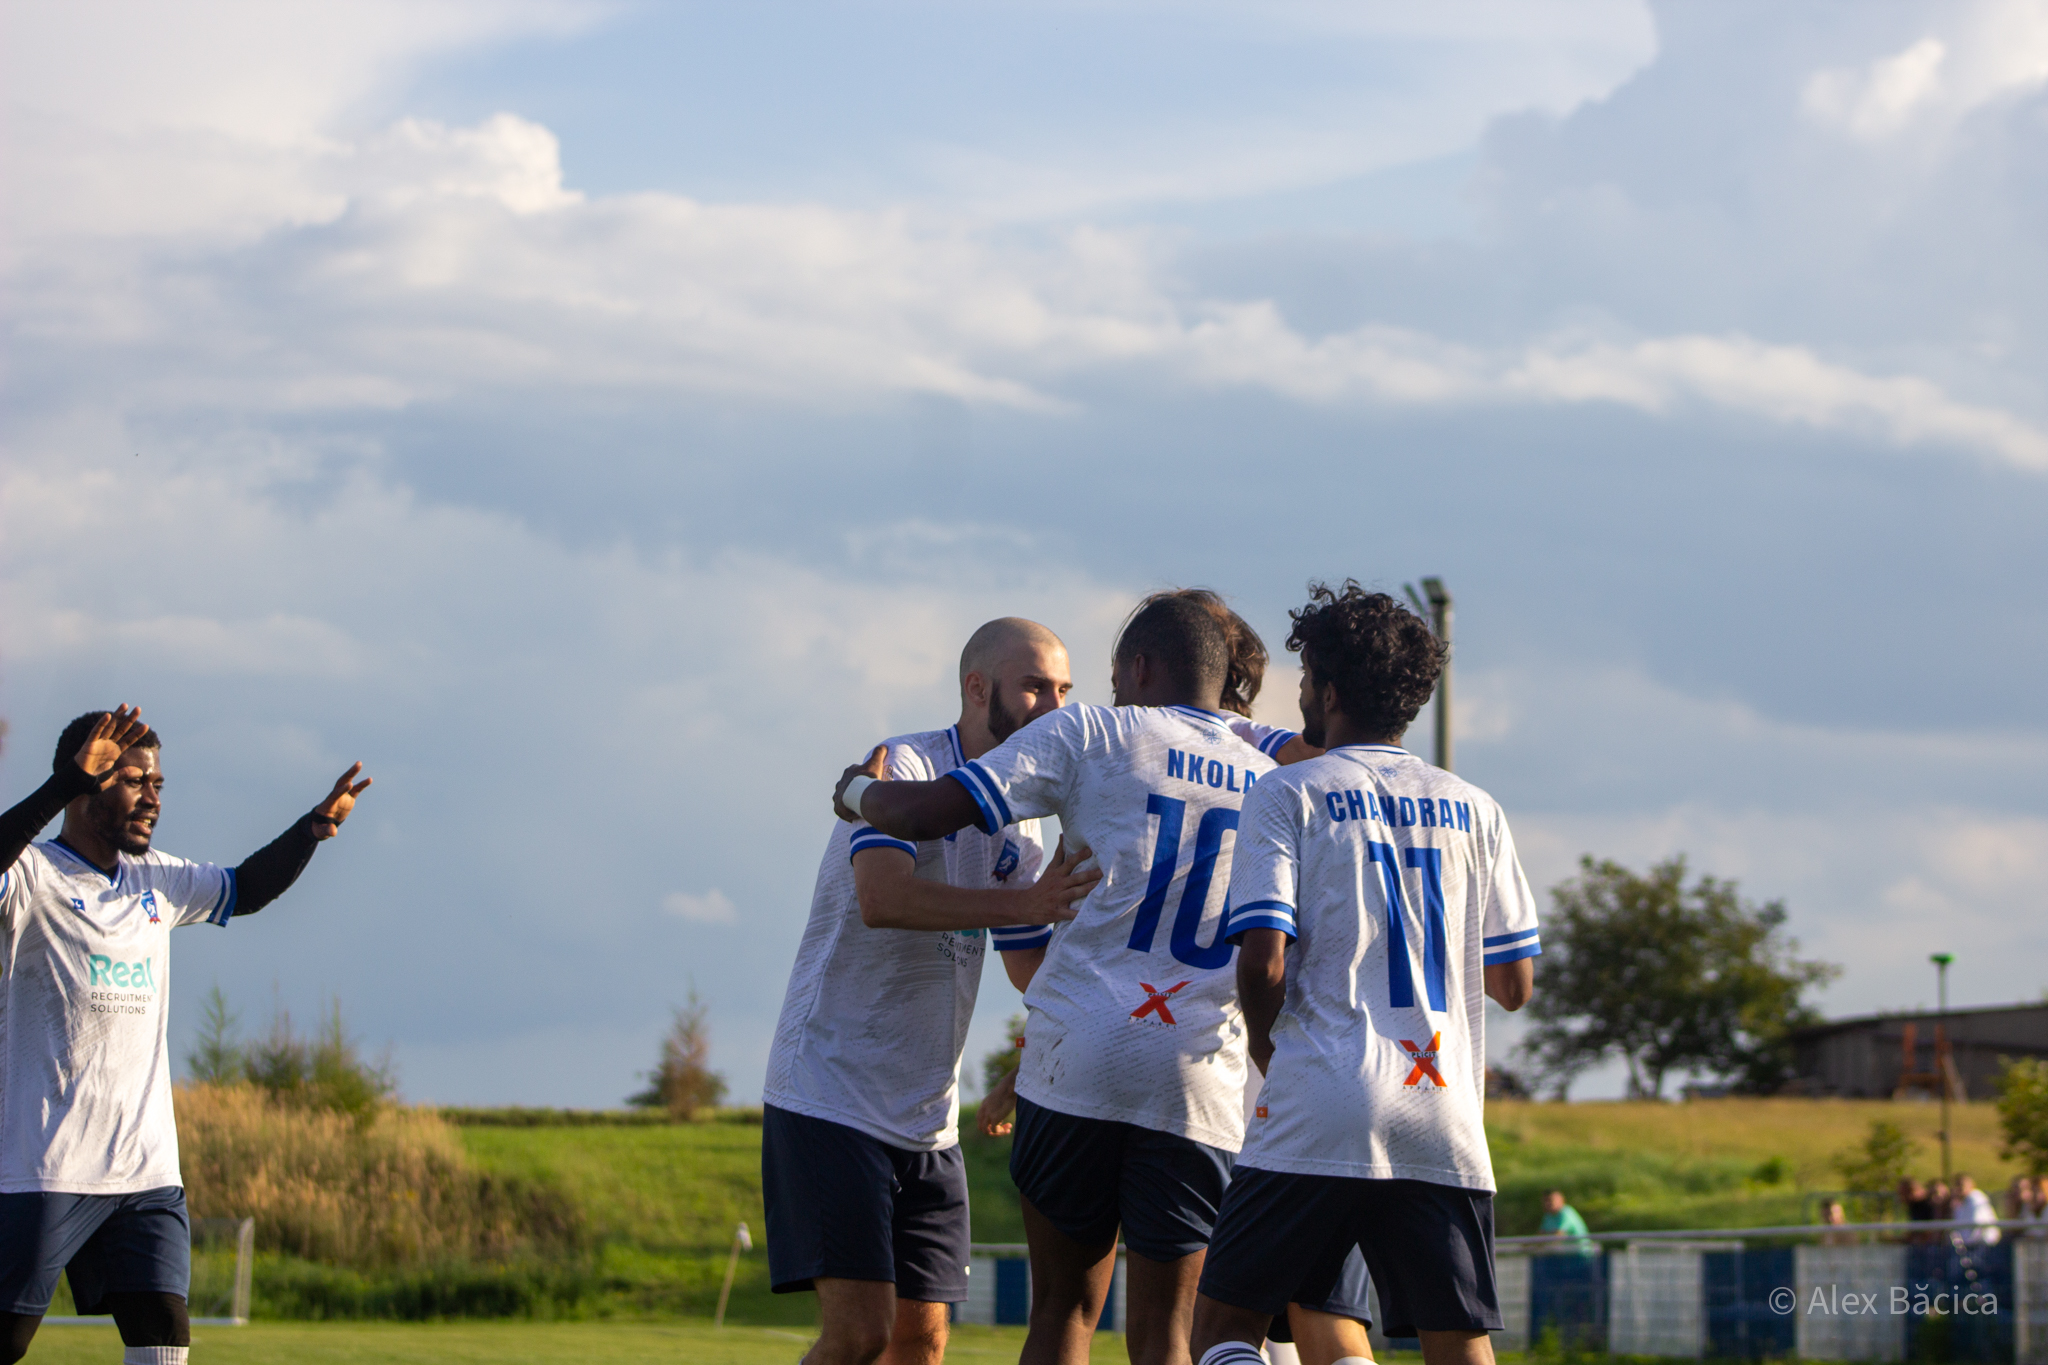 Players of Krakow Dragoons FC celebrating a goal with a nice view of a corn field and a dramatic sky in the background